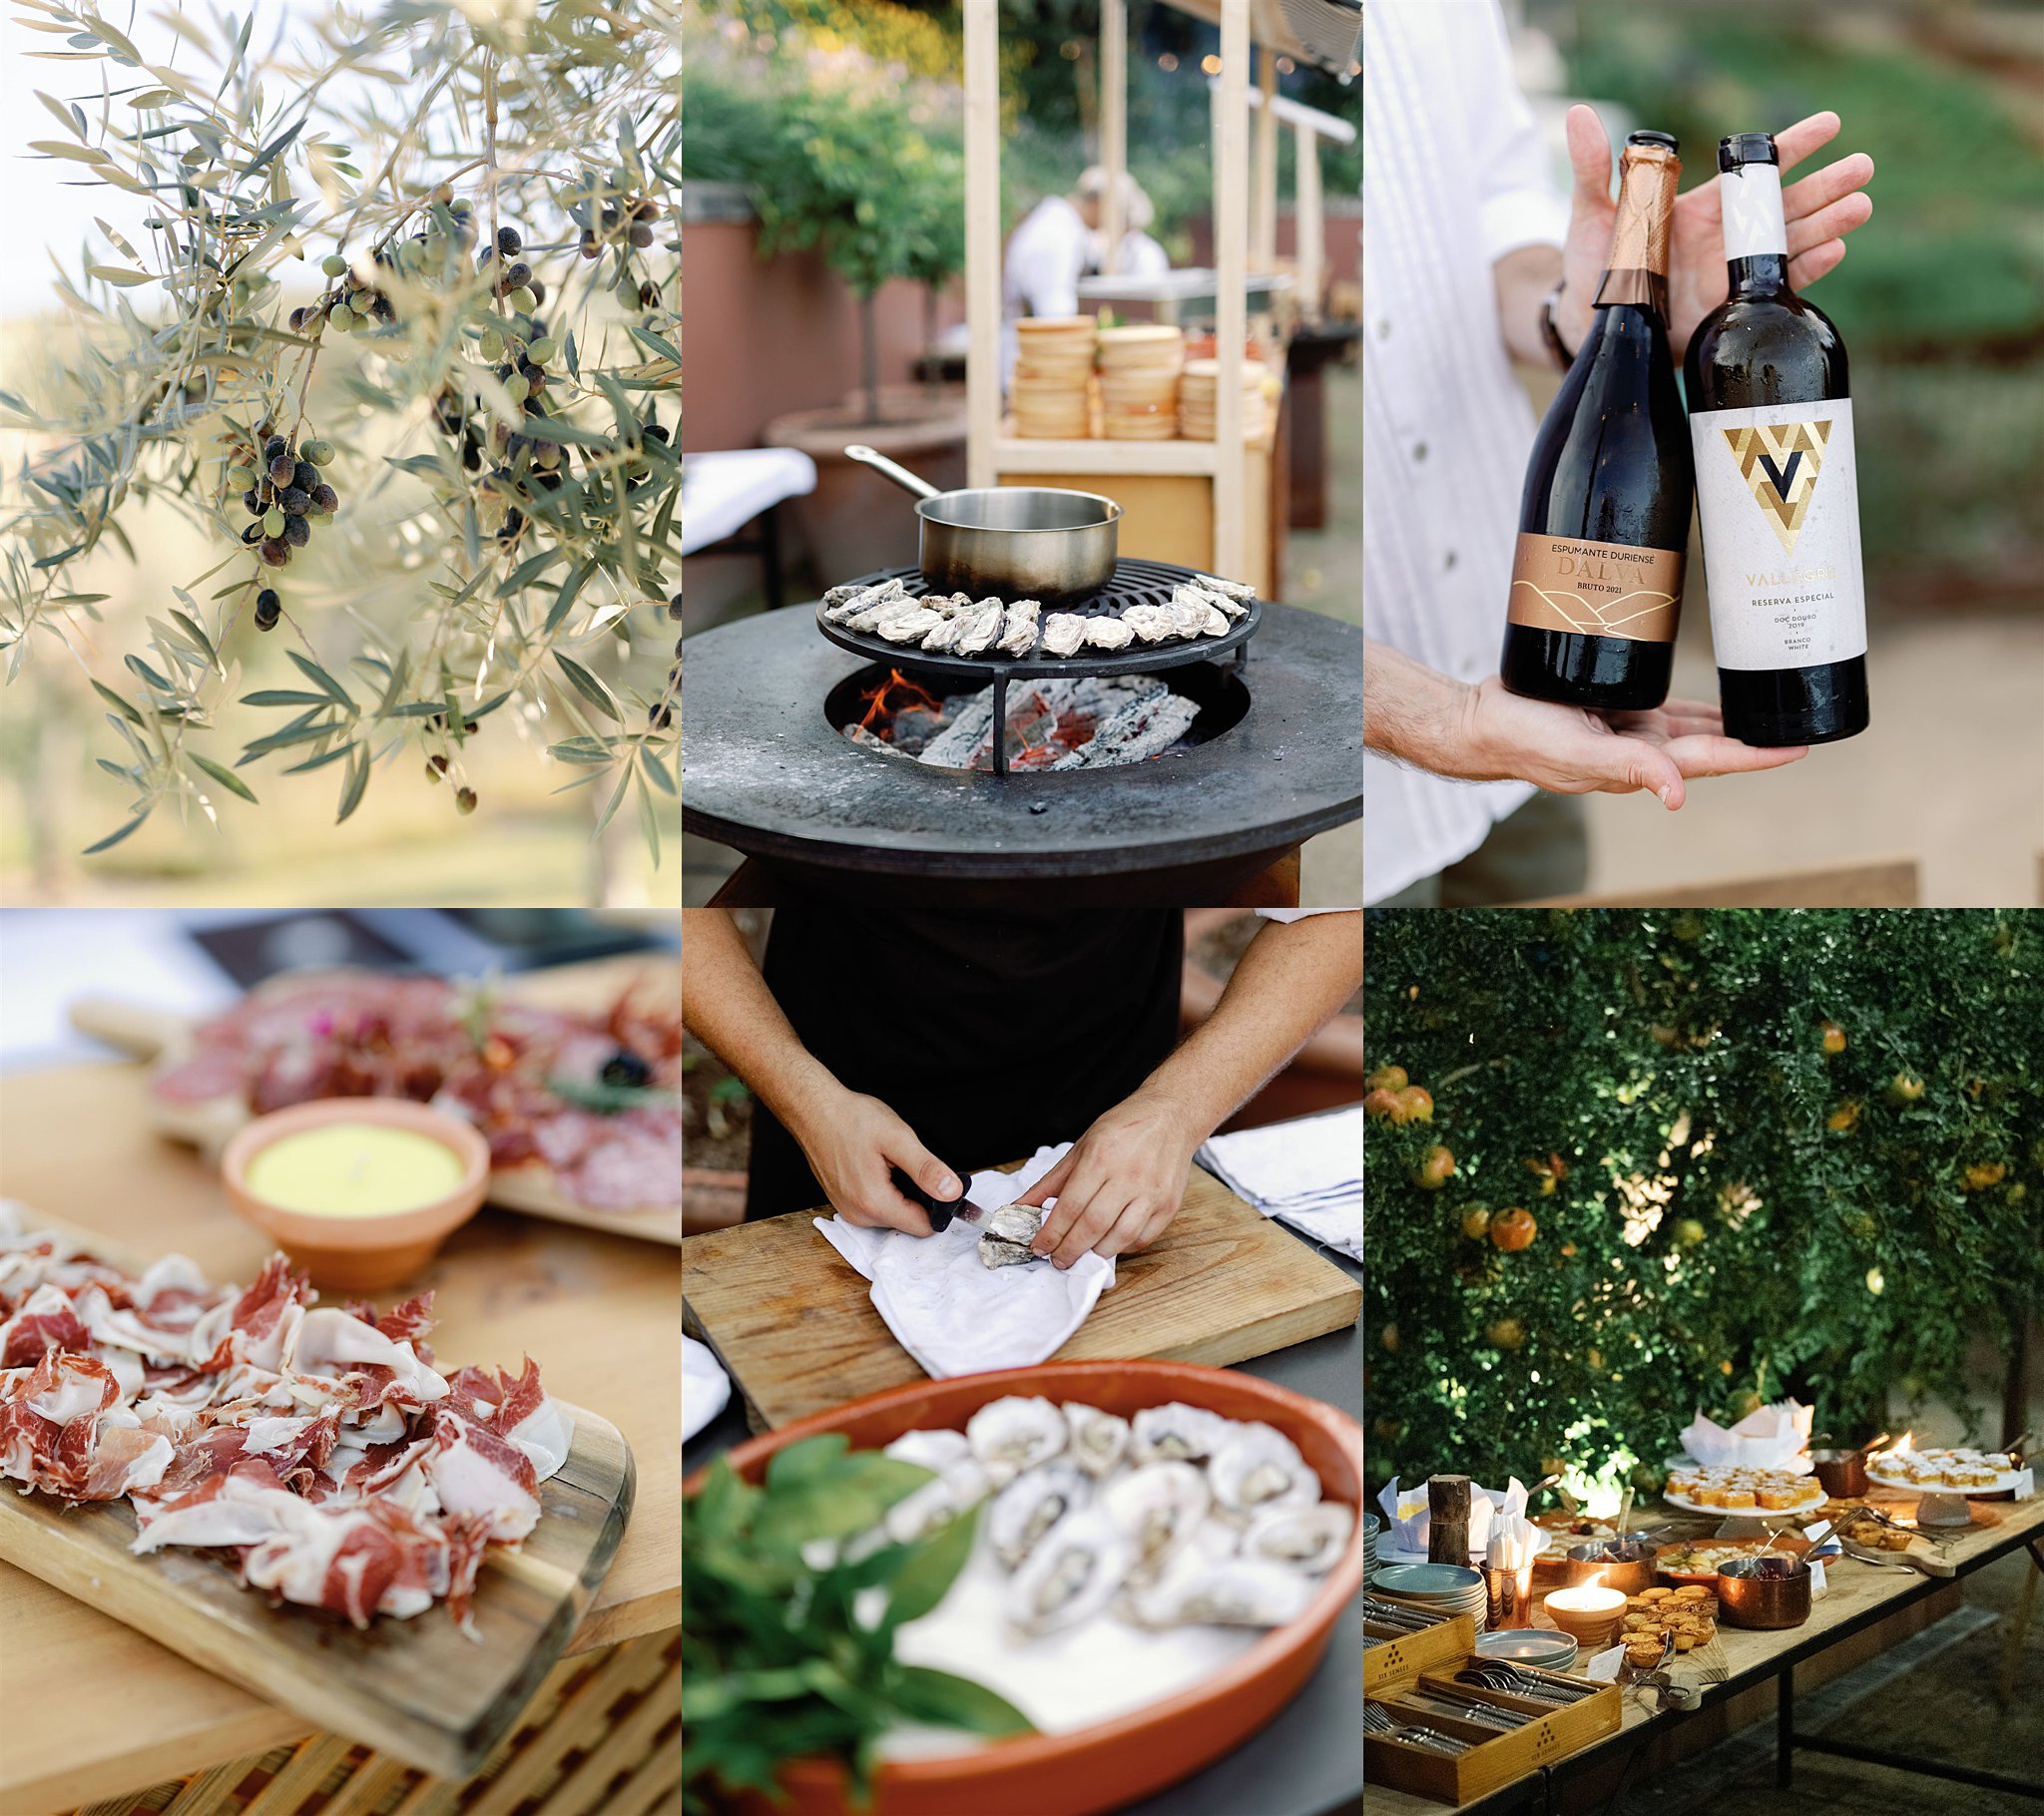 Portuguese dishes and wine. Six Senses Douro Valley